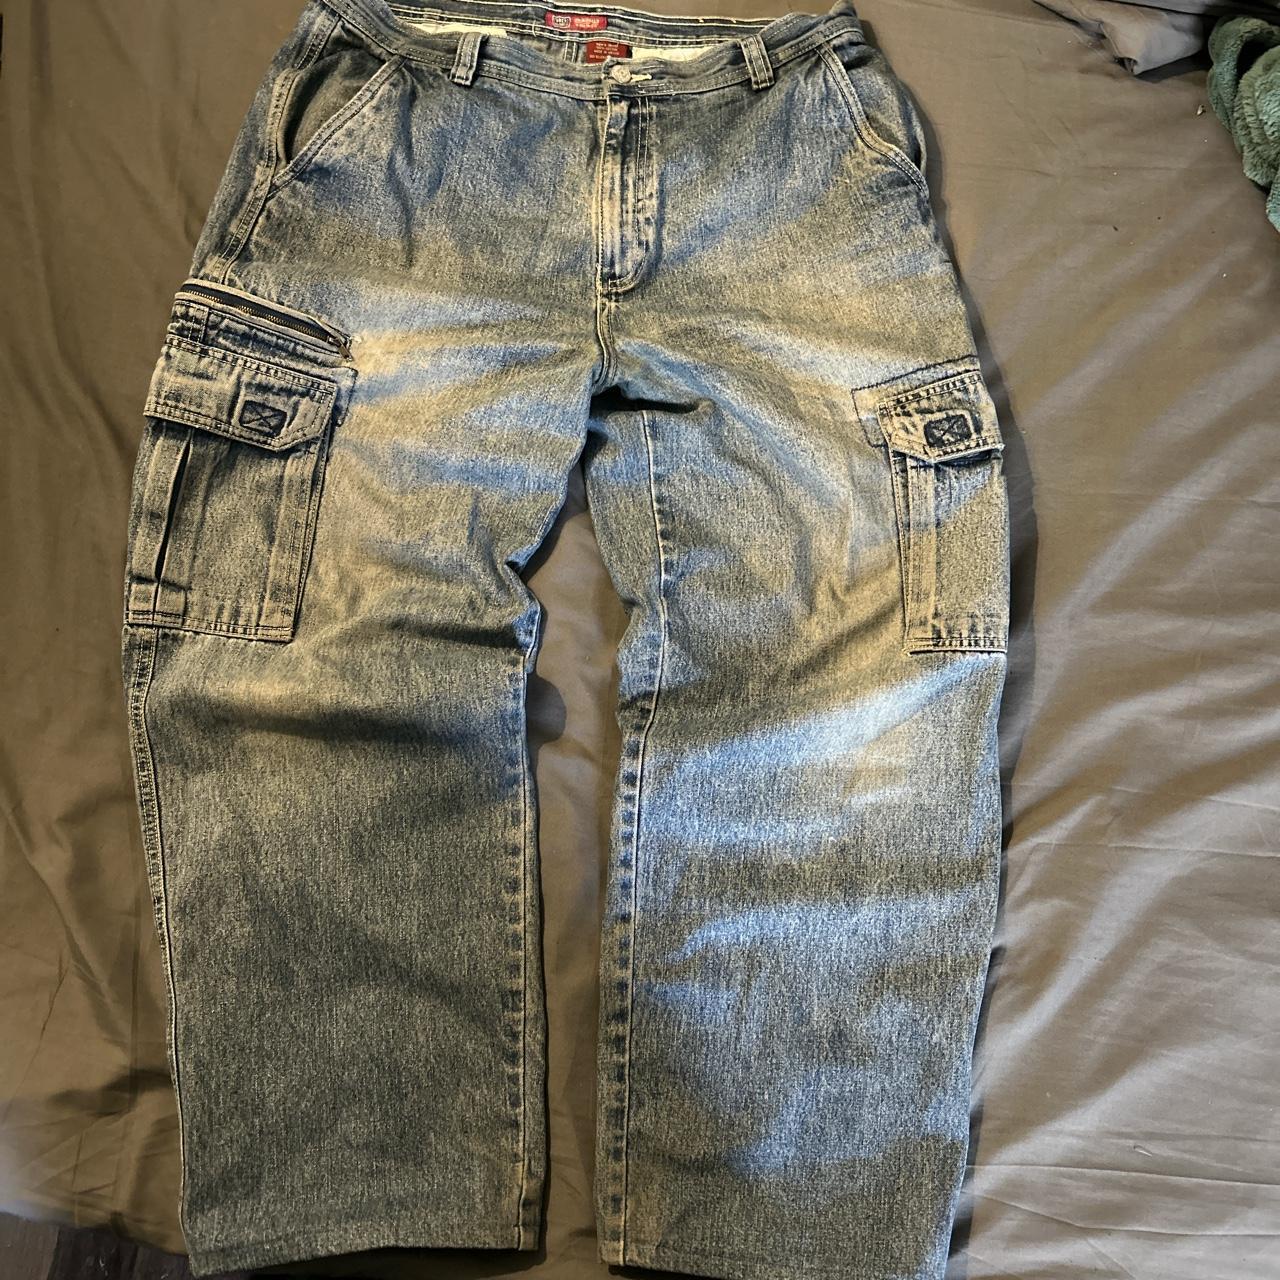 item listed by 0pcloset